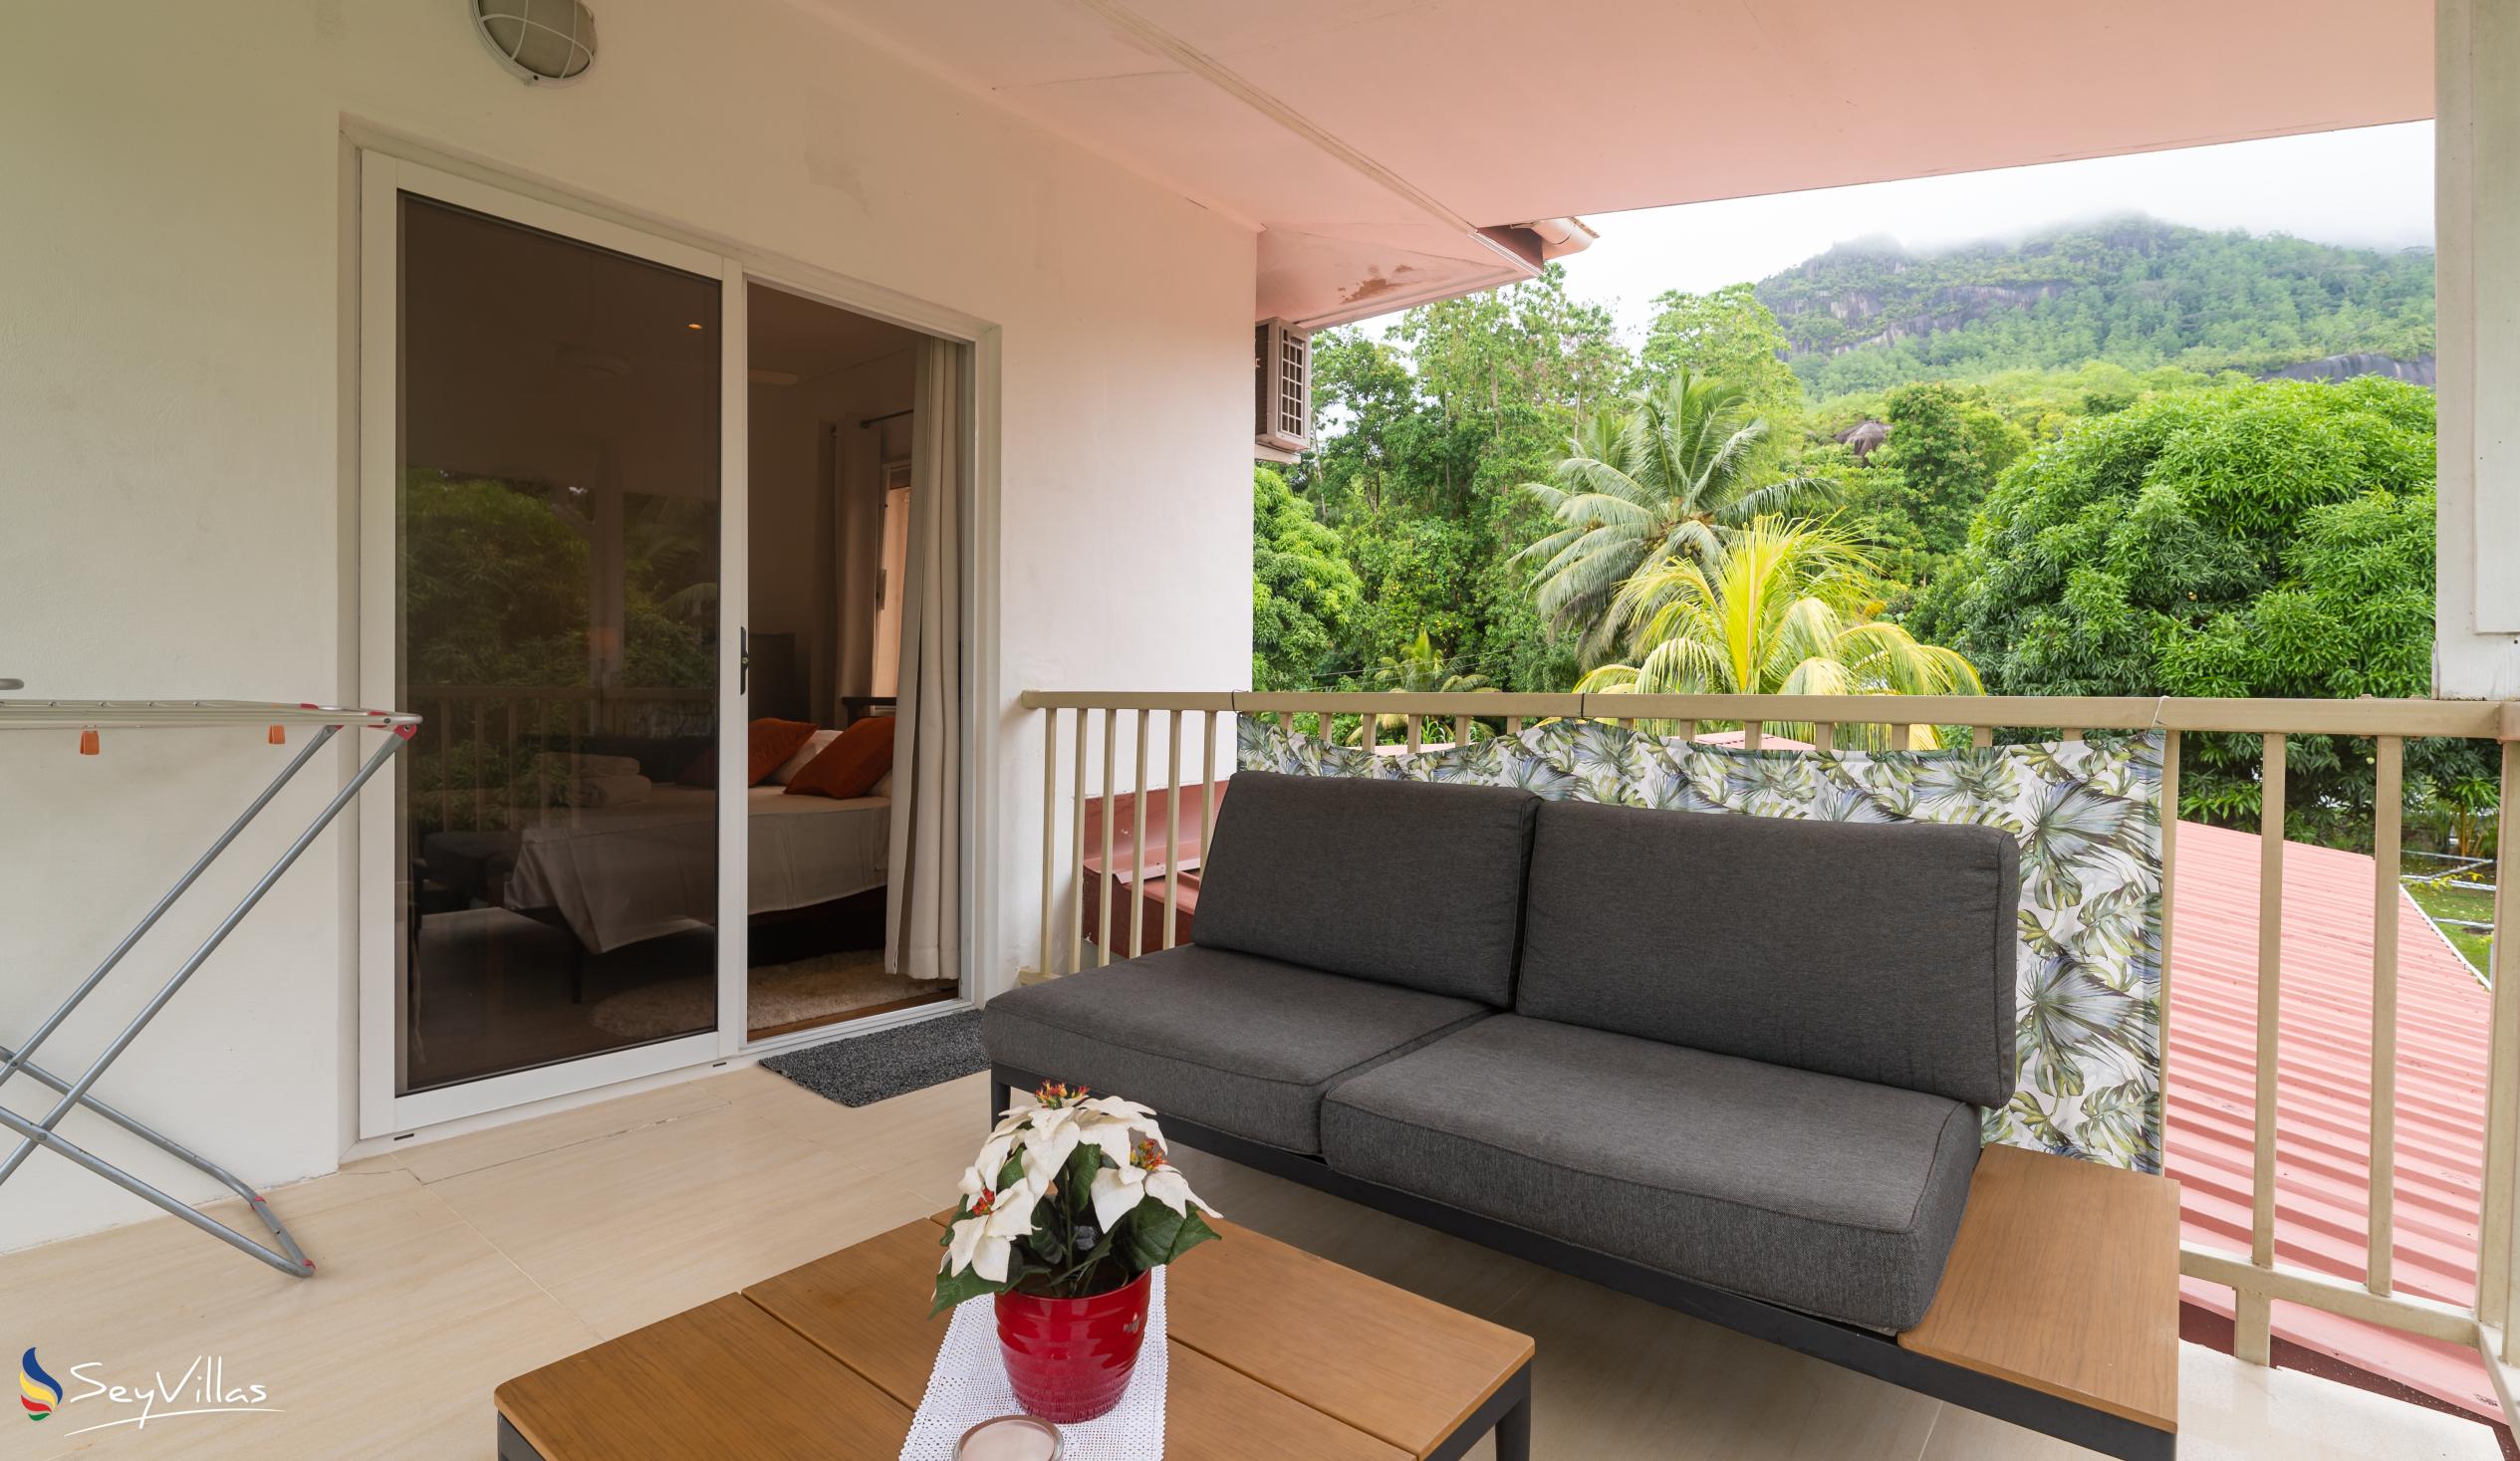 Foto 19: The Orchard Holiday Home - Innenbereich - Mahé (Seychellen)